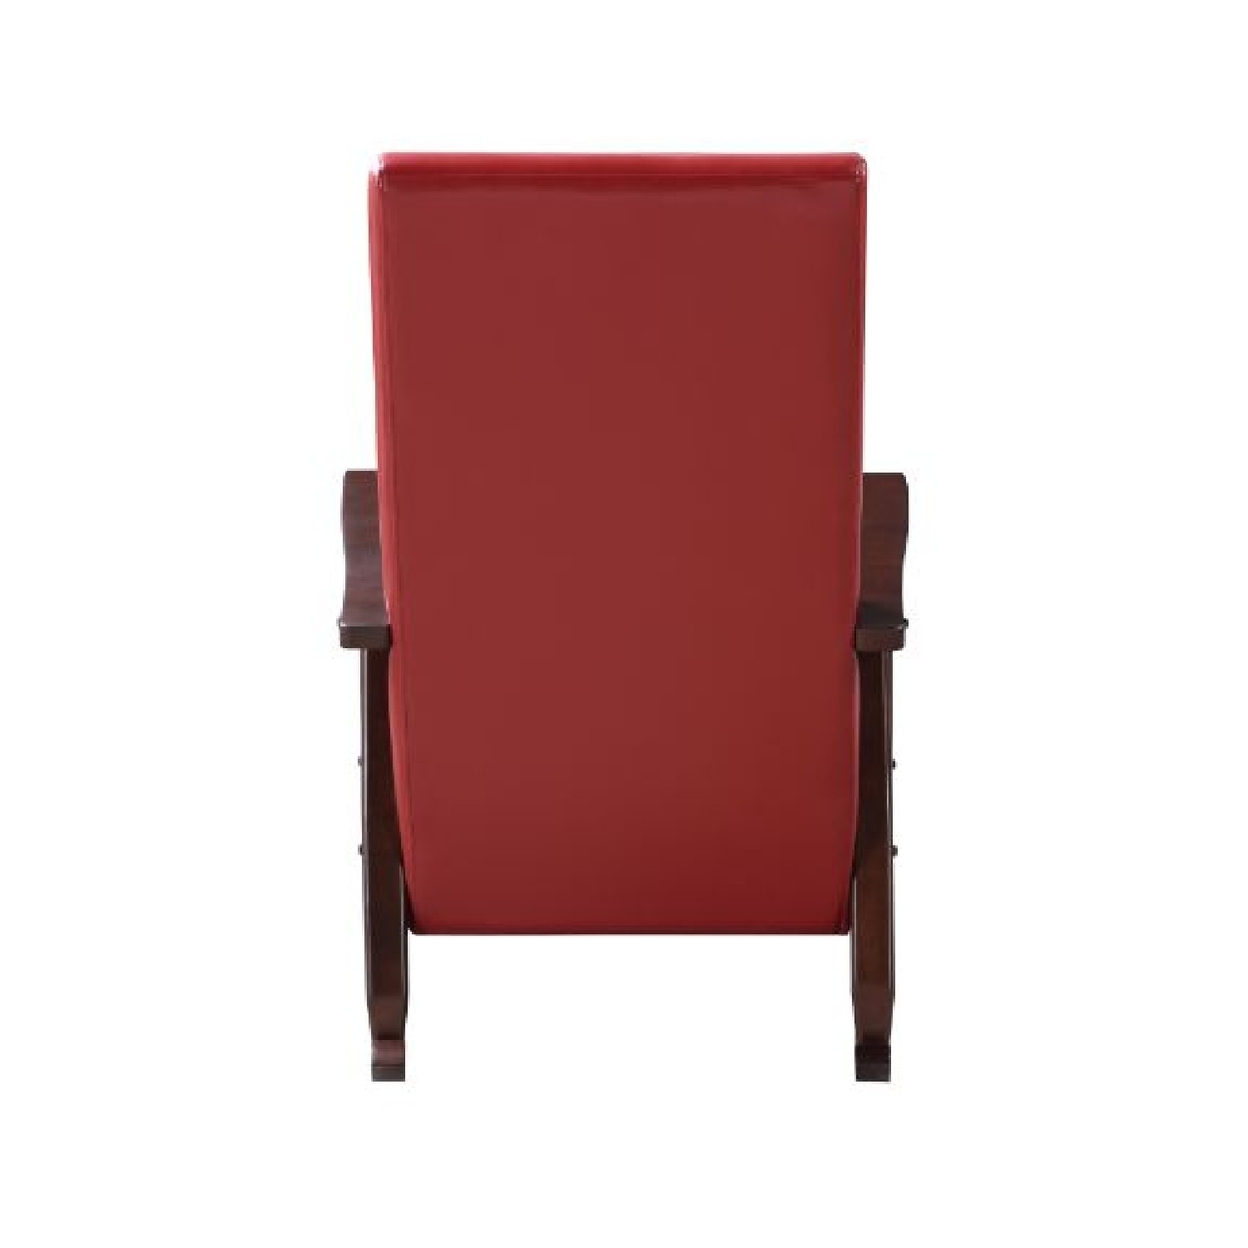 Rocking Chair With Leatherette Seating And Wooden Frame, Red- Saltoro Sherpi